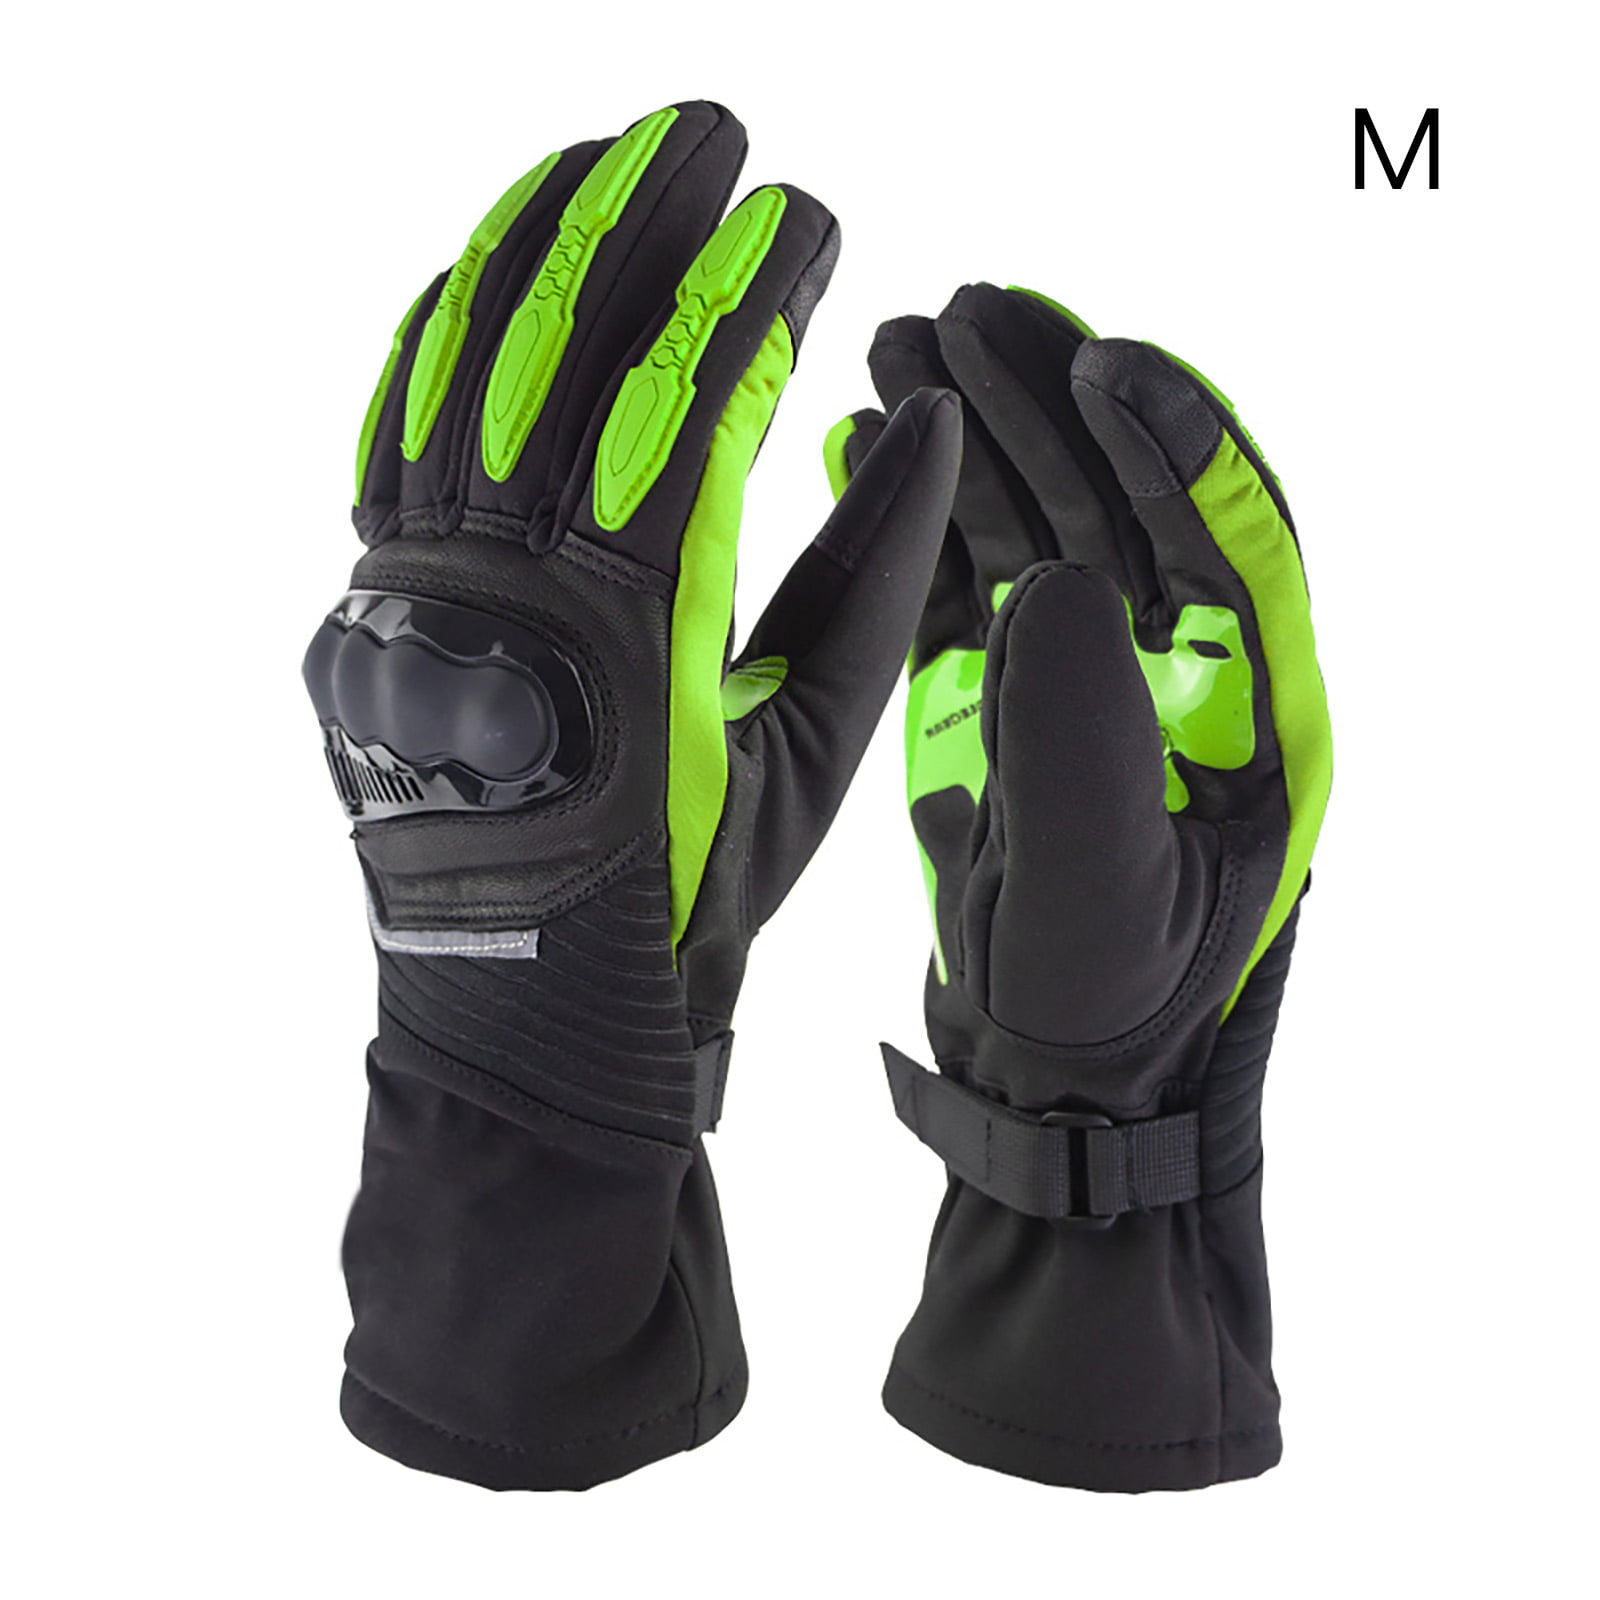 Outdoor Sports Cycling Motocross Motorcycle Gloves for Men Women Touchscreen Dirt Bike Gloves Breathable Full Finger Gloves Knuckle Protection Motocross Riding Gloves for Road Racing Climbing 